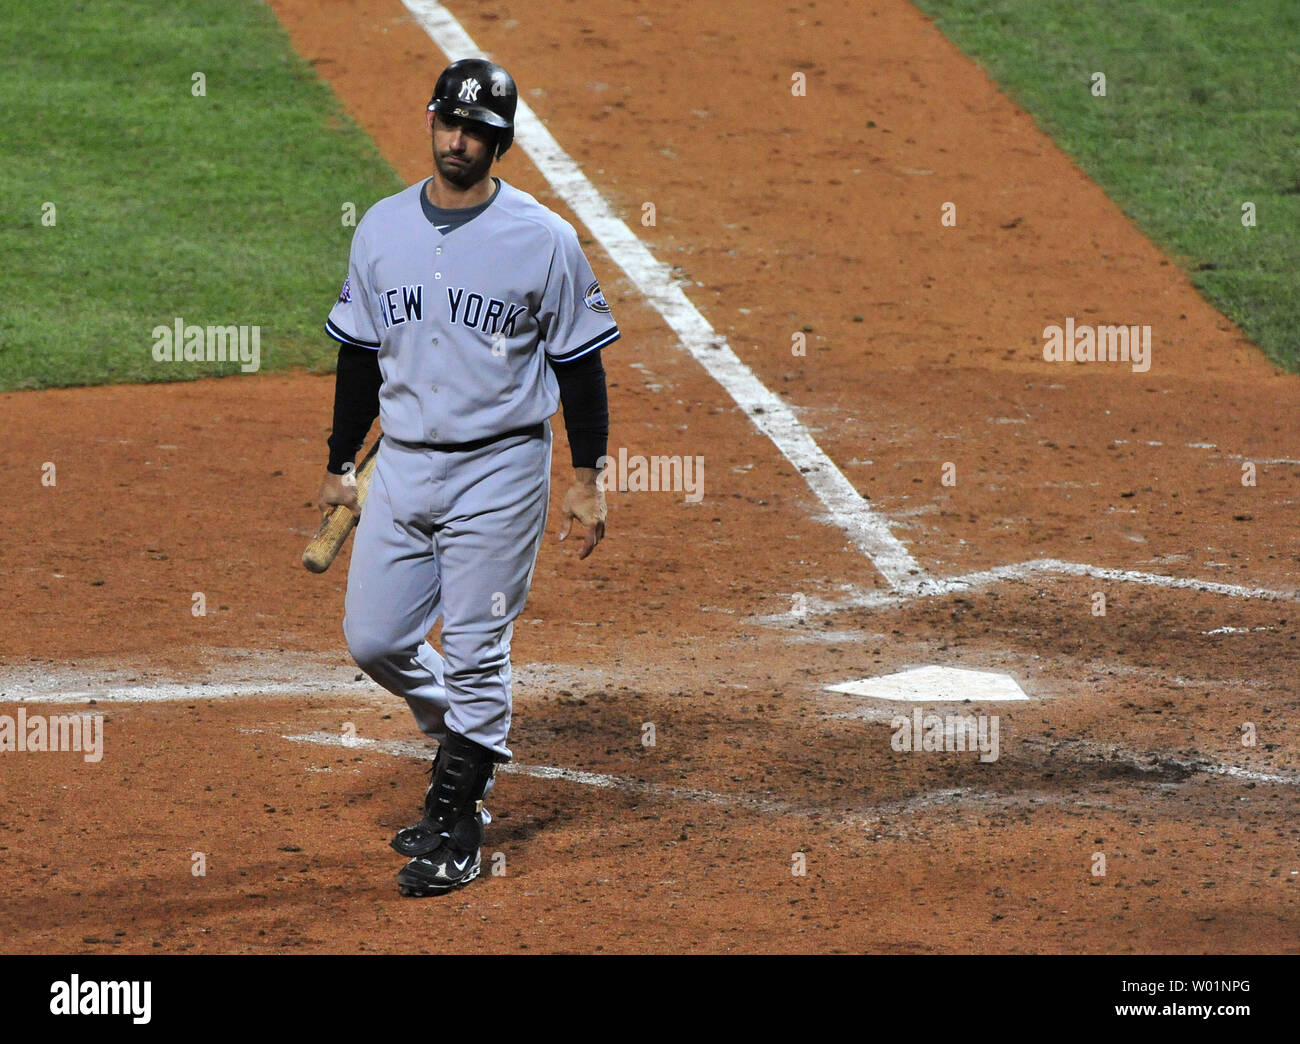 New York Yankees catcher Jorge Posada stikes out during the